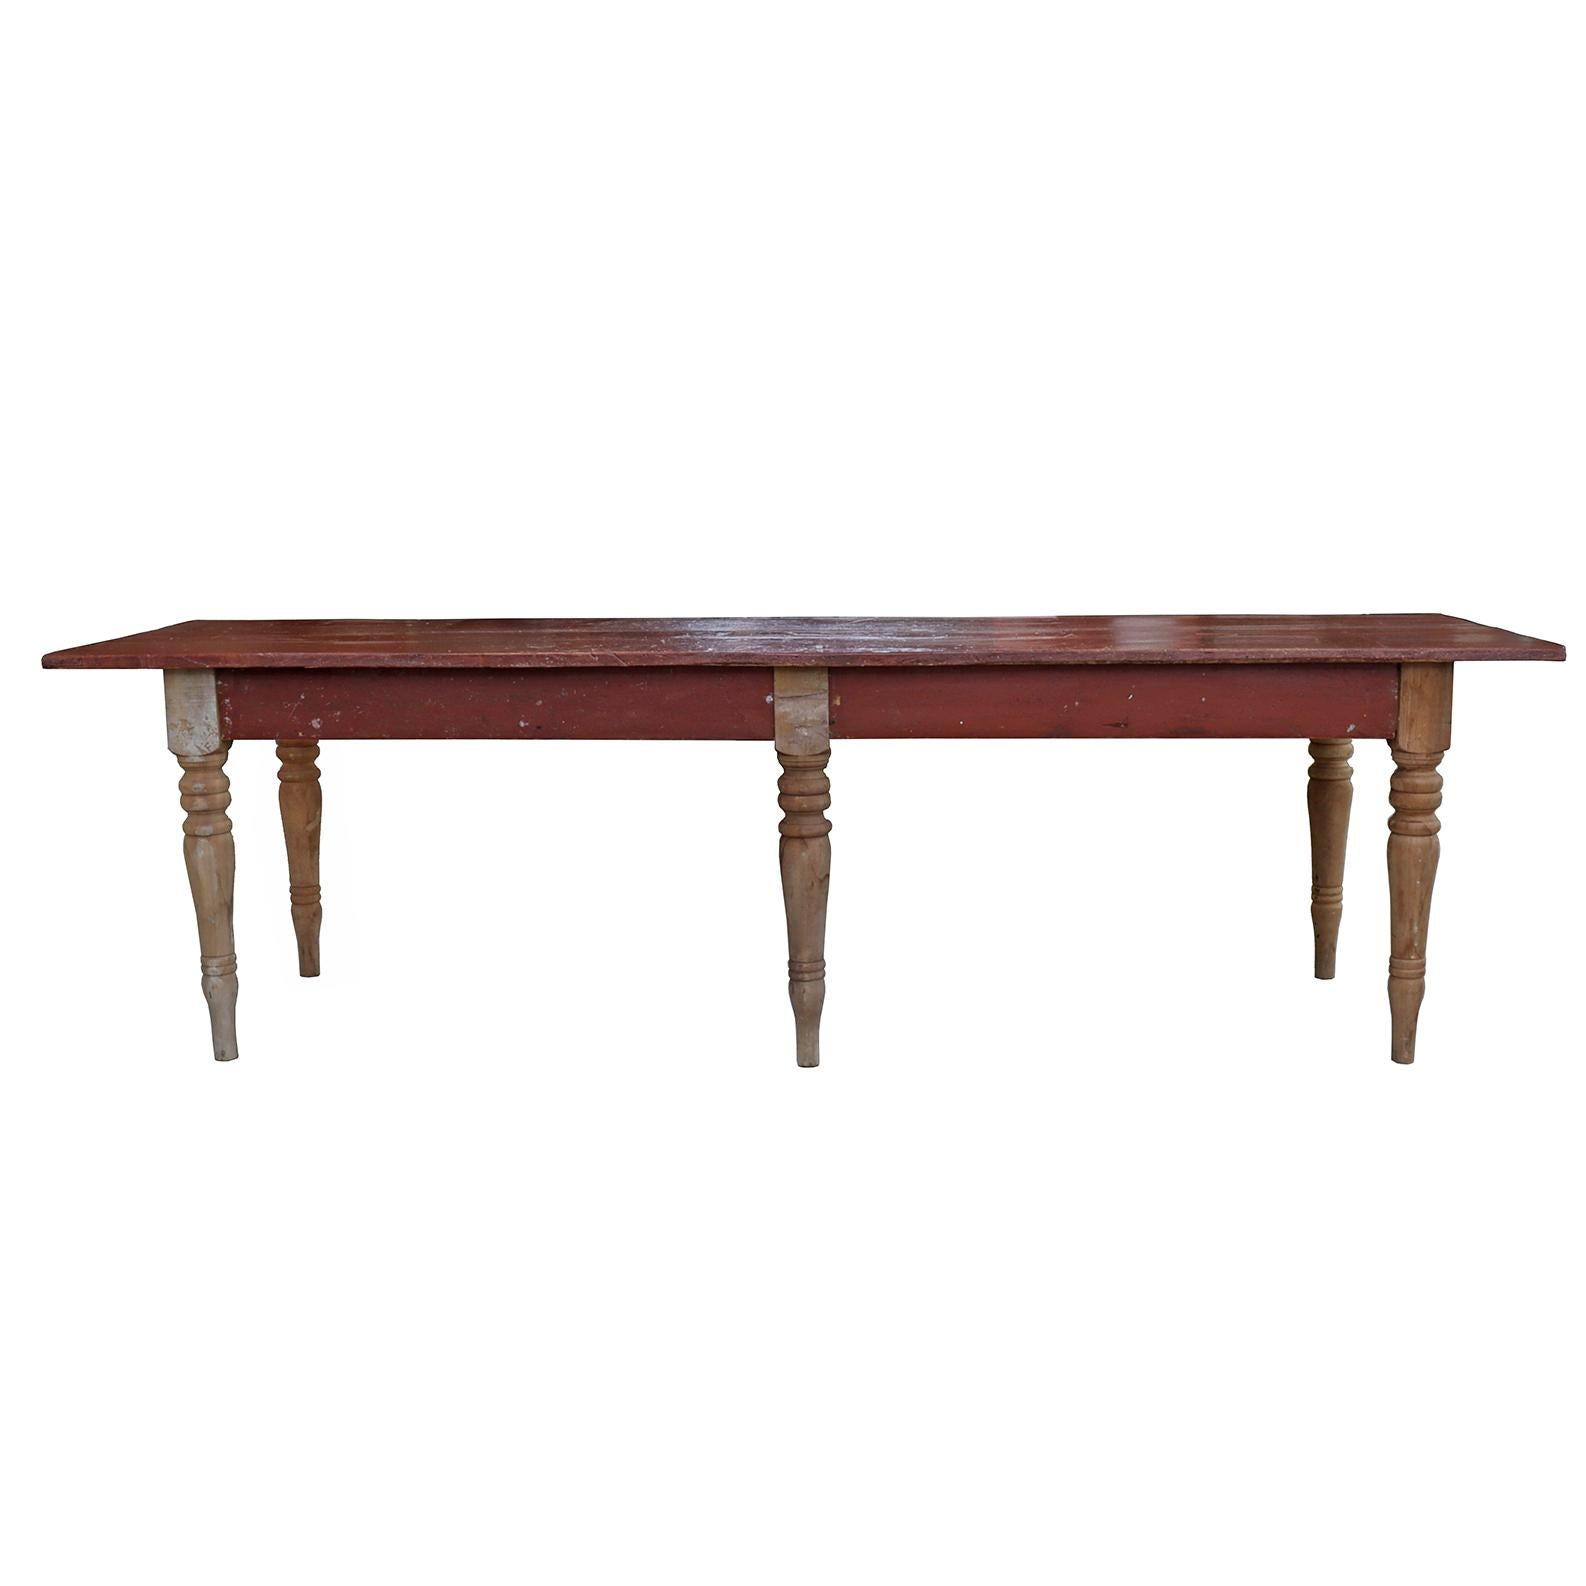 This generously sized table has a bright red top and sturdy turned legs. A great farmhouse aesthetic piece with history and character. Early 20th century.